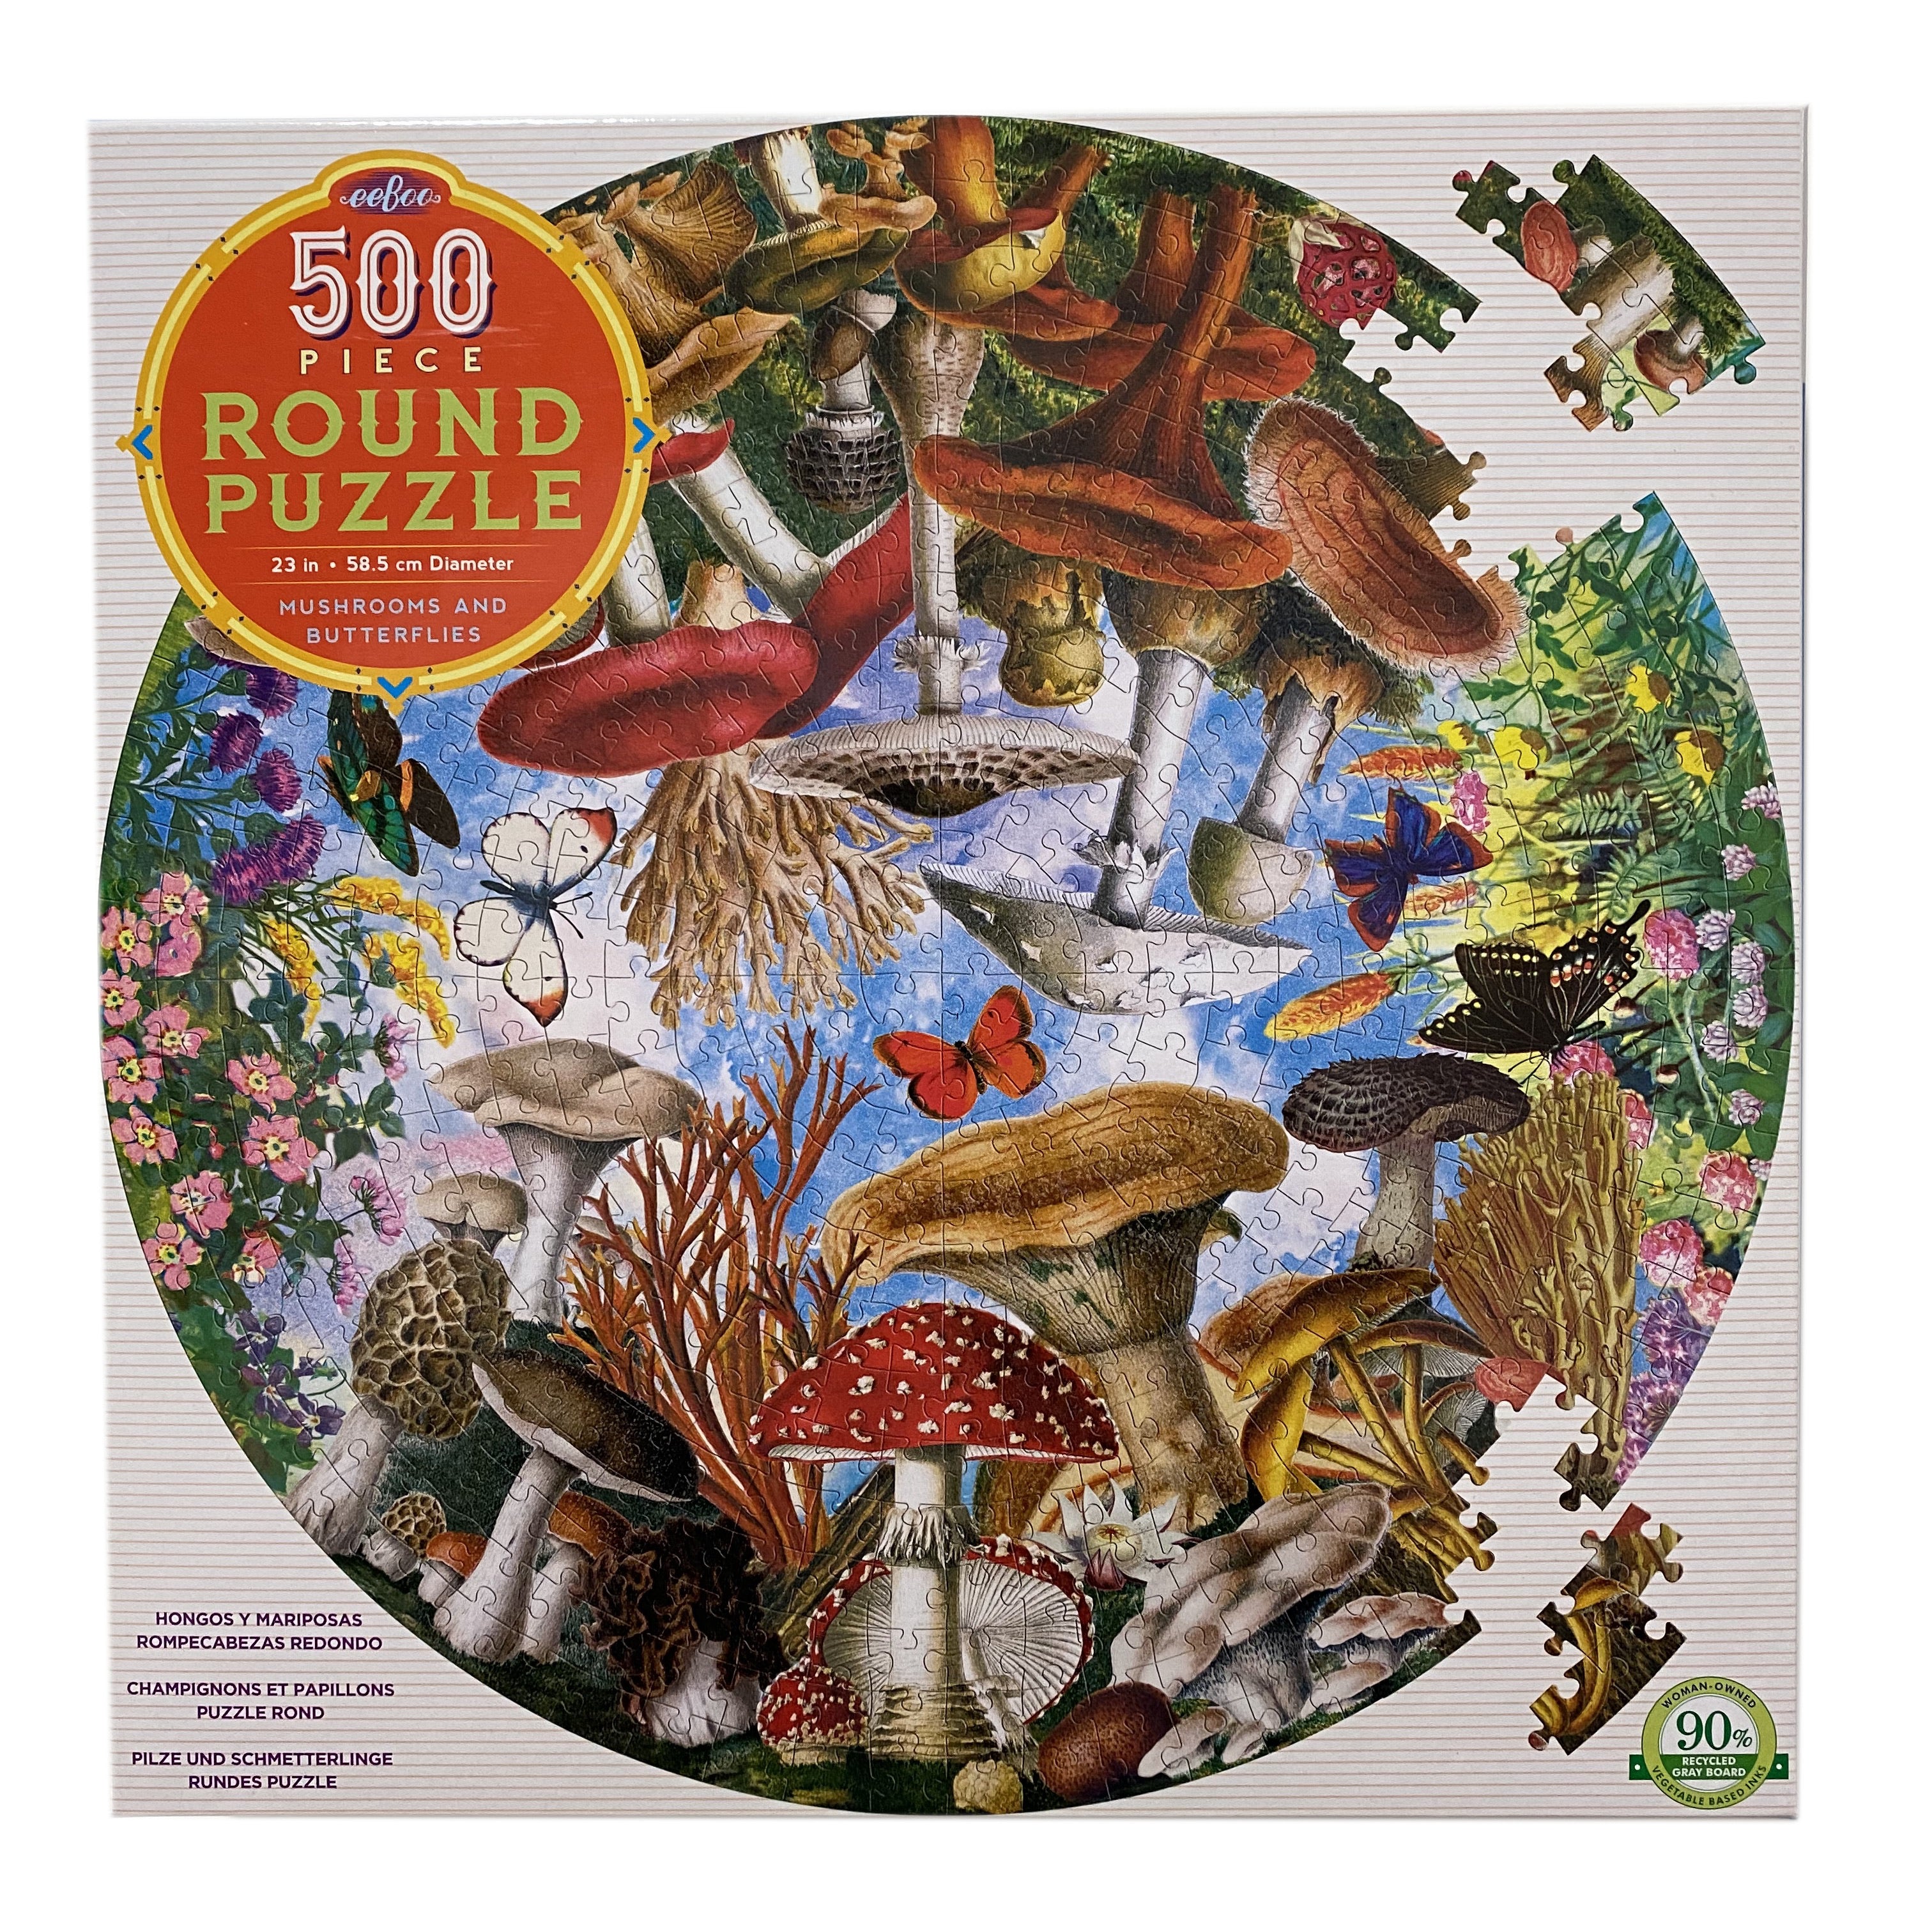 Mushrooms and Butterflies 500 Piece Round Puzzle    